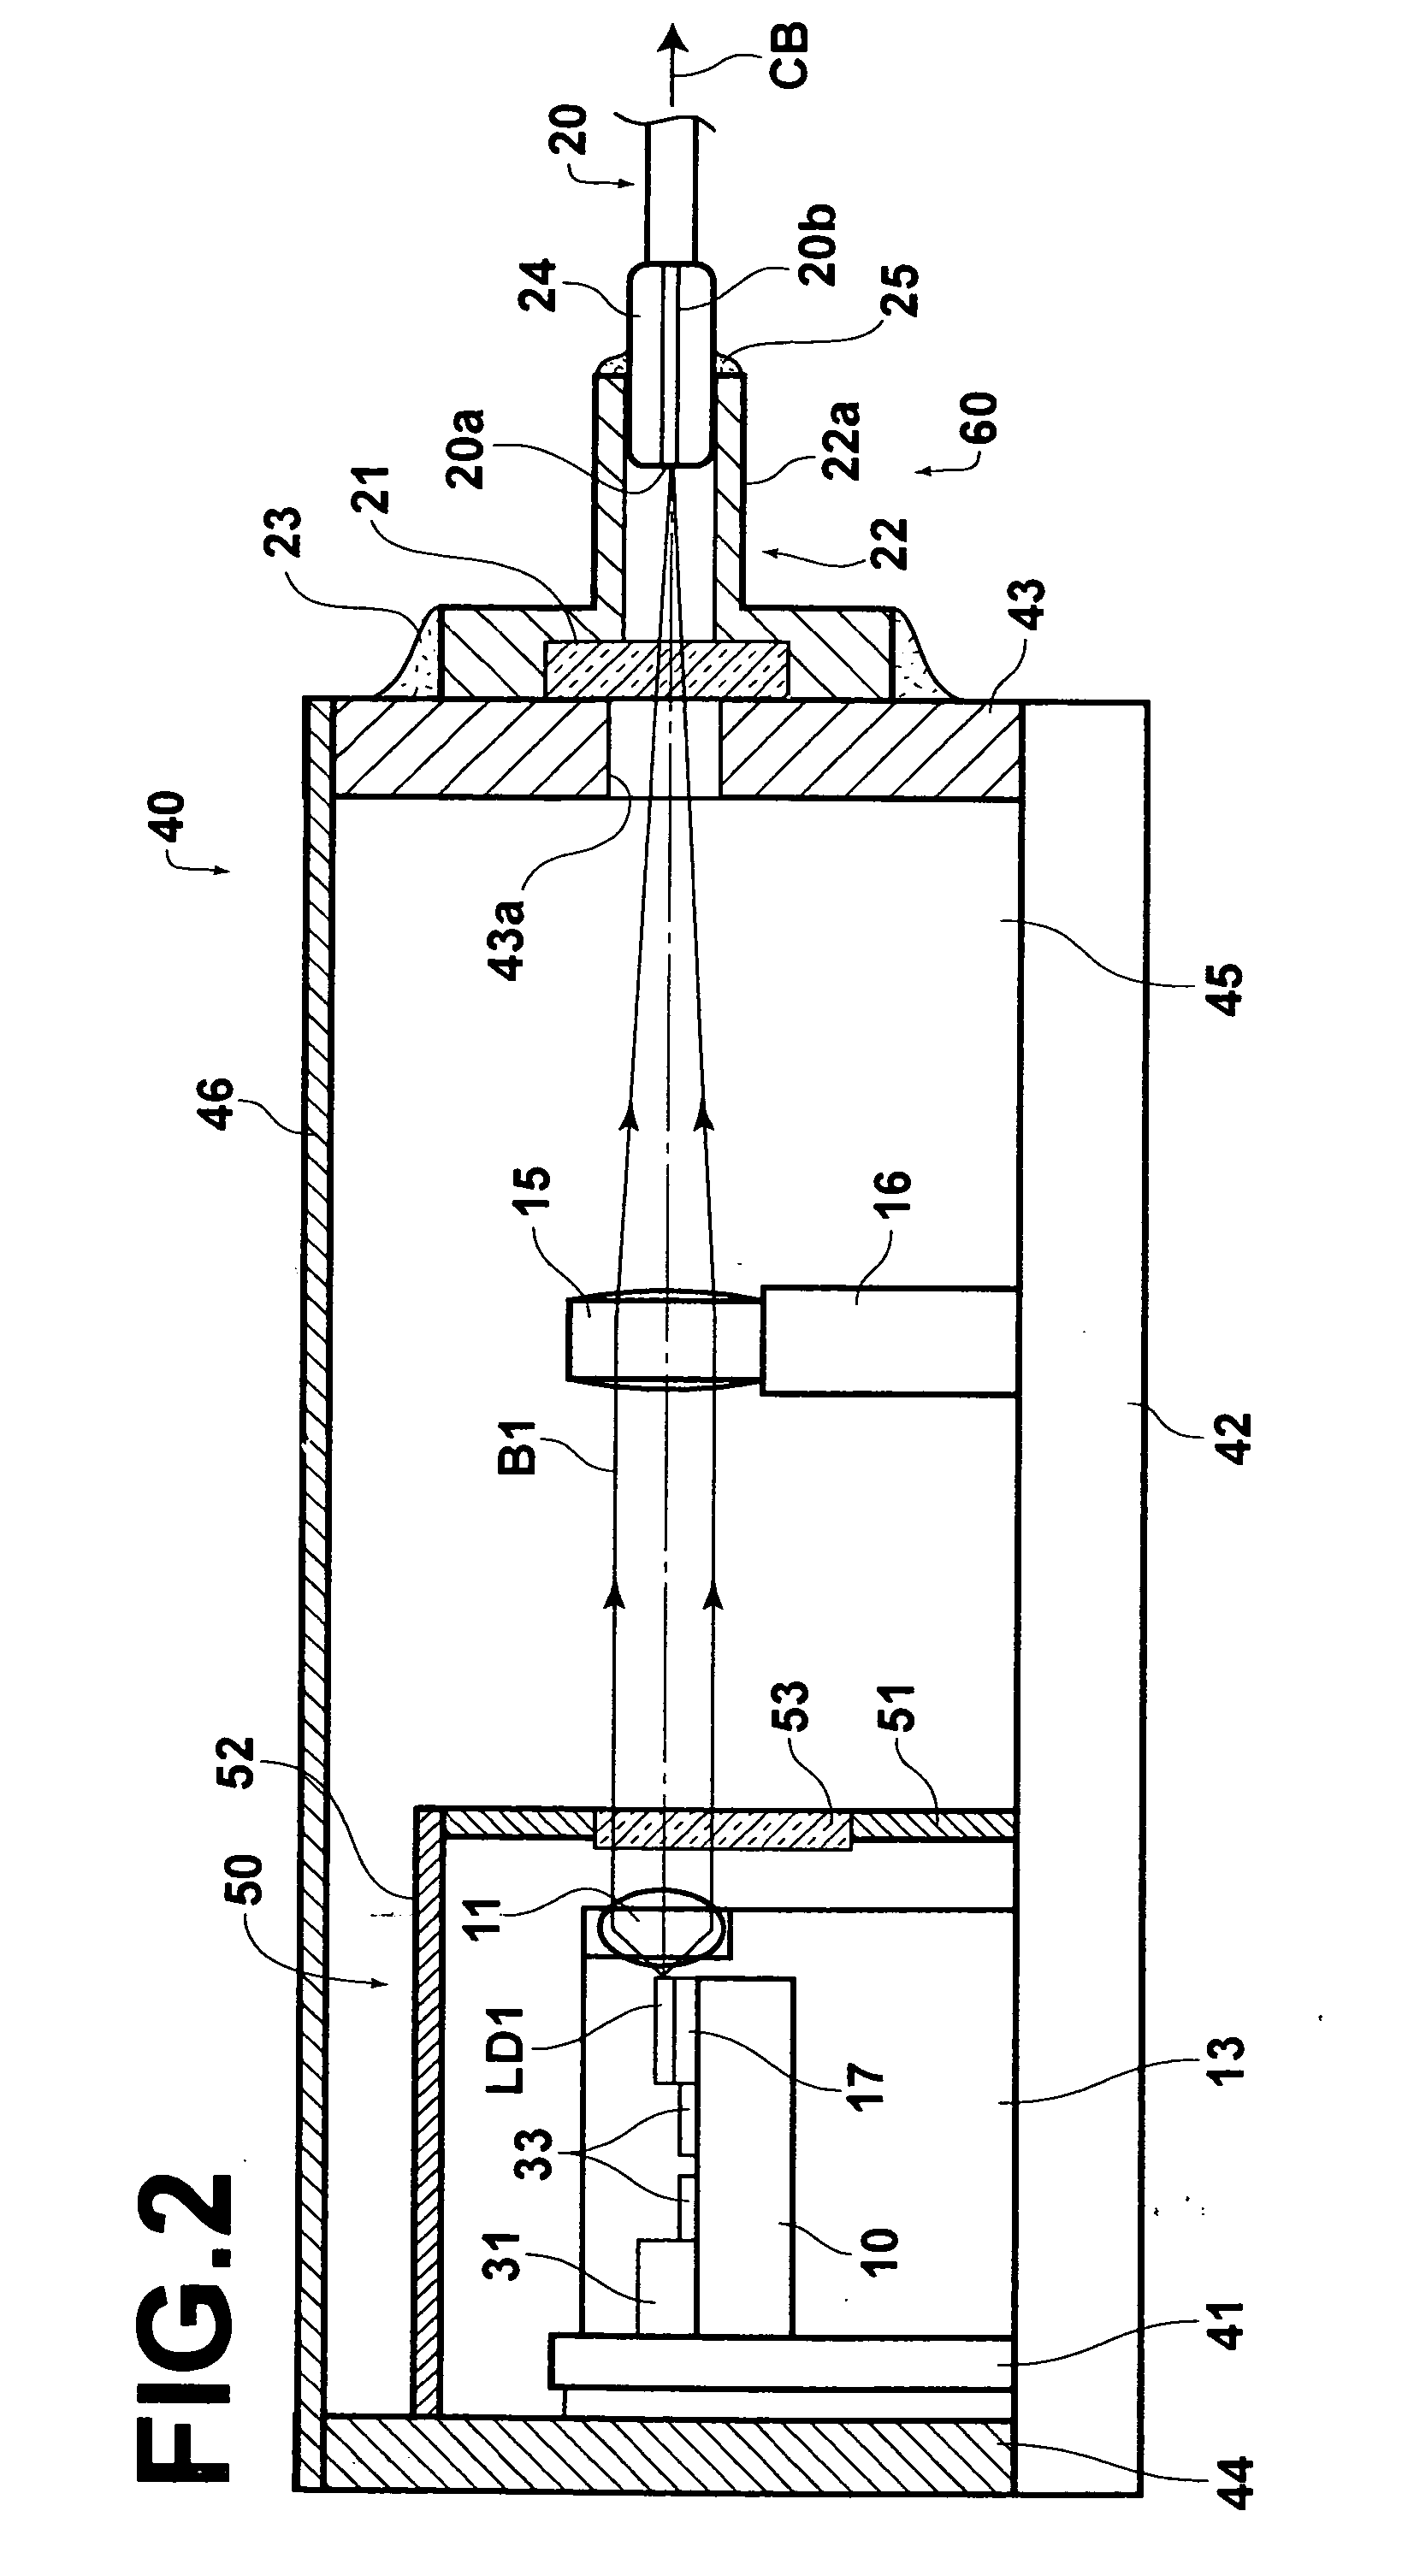 Laser module with sealed package containing limited optical components